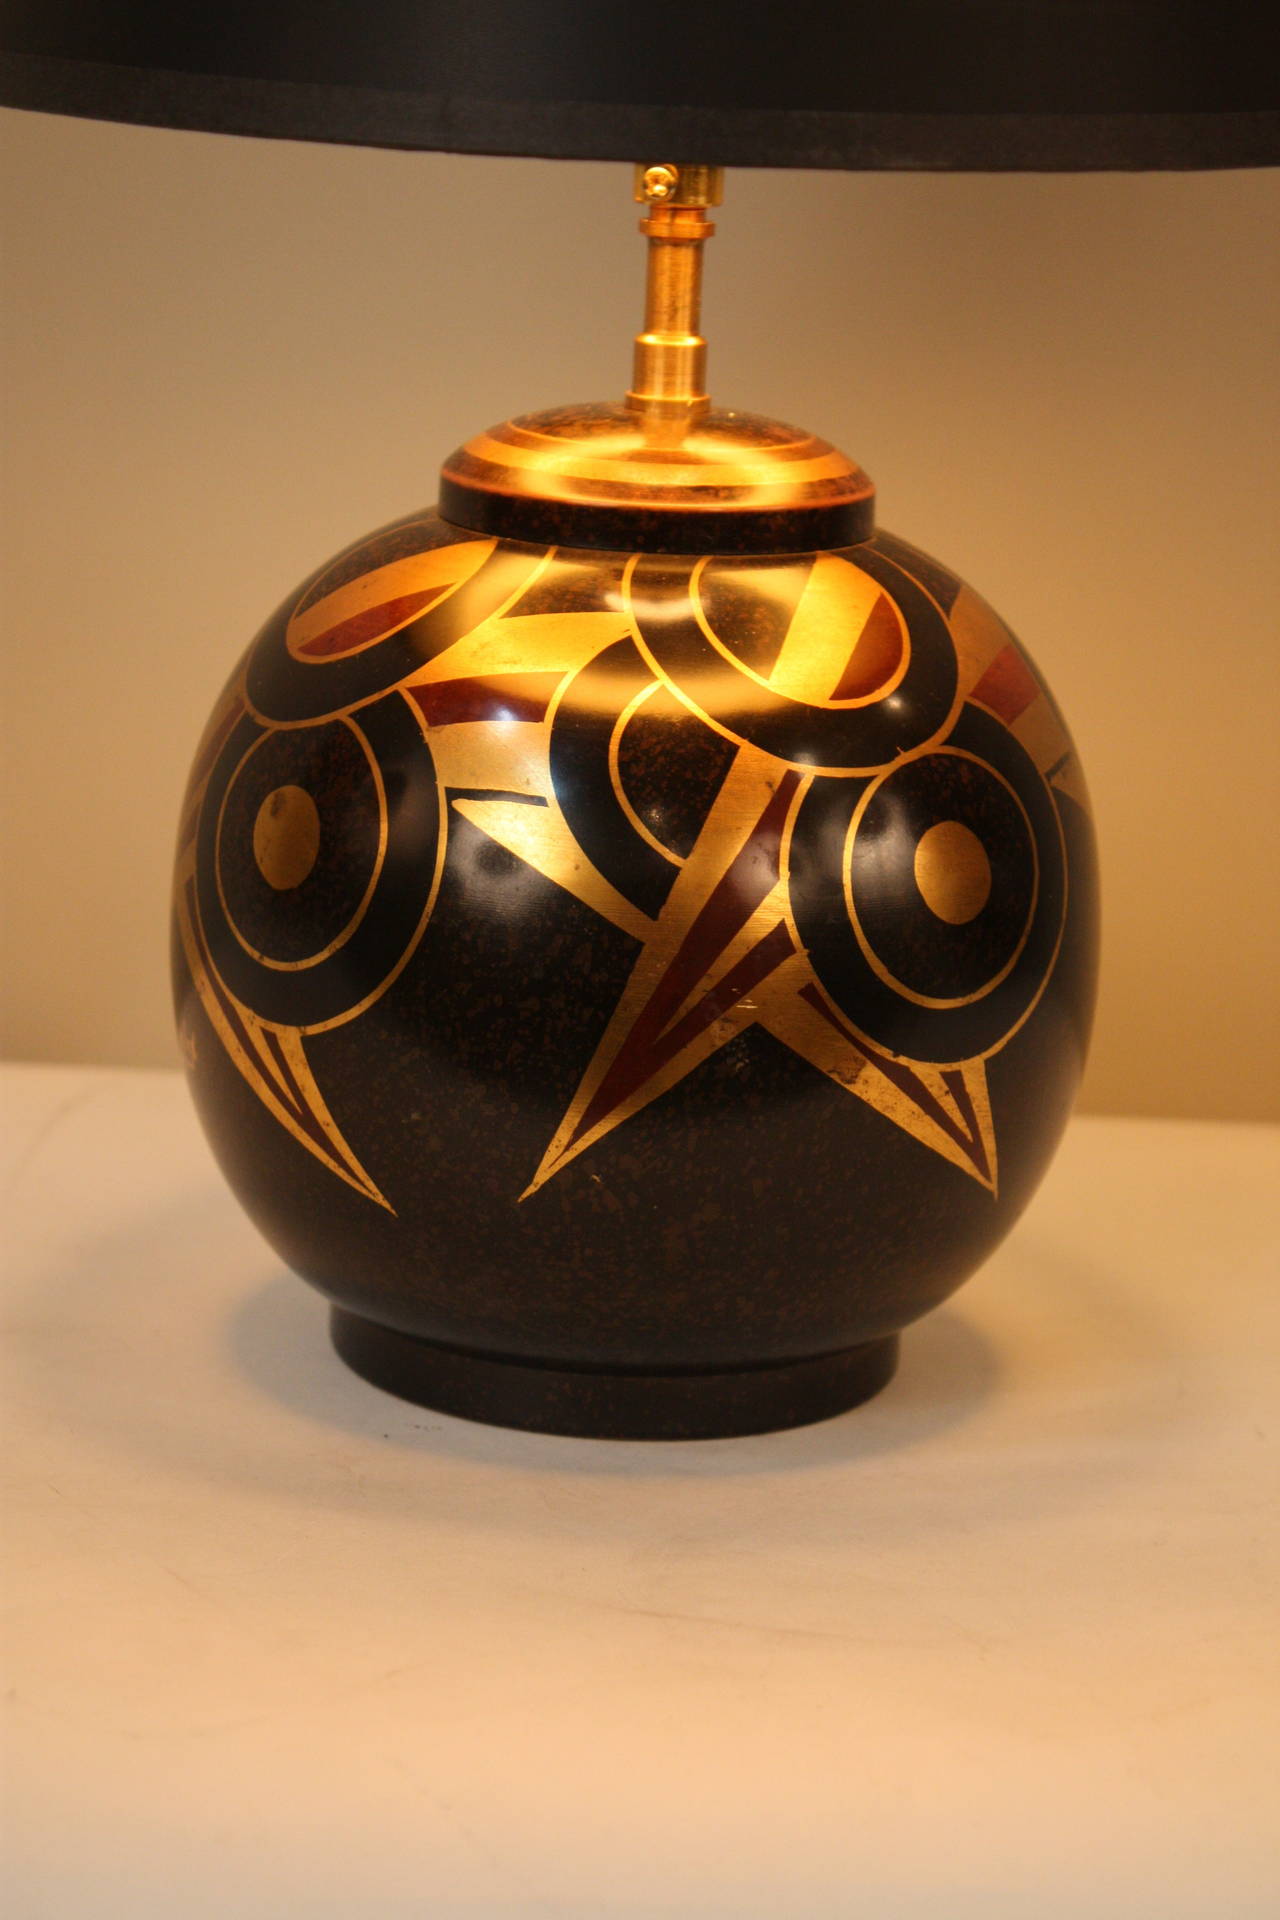 Beautiful oxidized black bronze lamp base which in special technique copper and gold has been applied on the bronze.